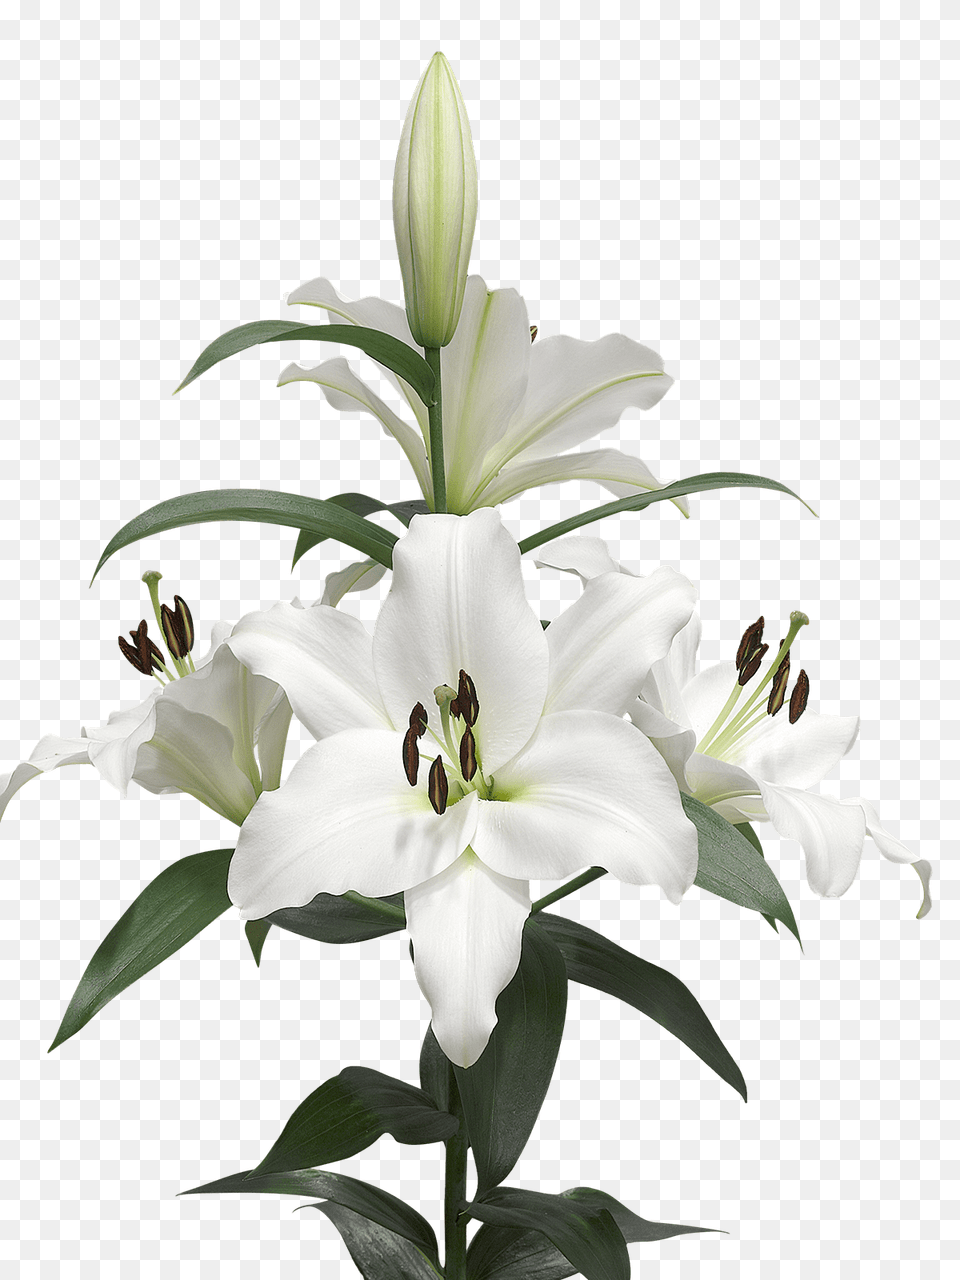 A Few Lilies, Flower, Plant, Anther, Lily Png